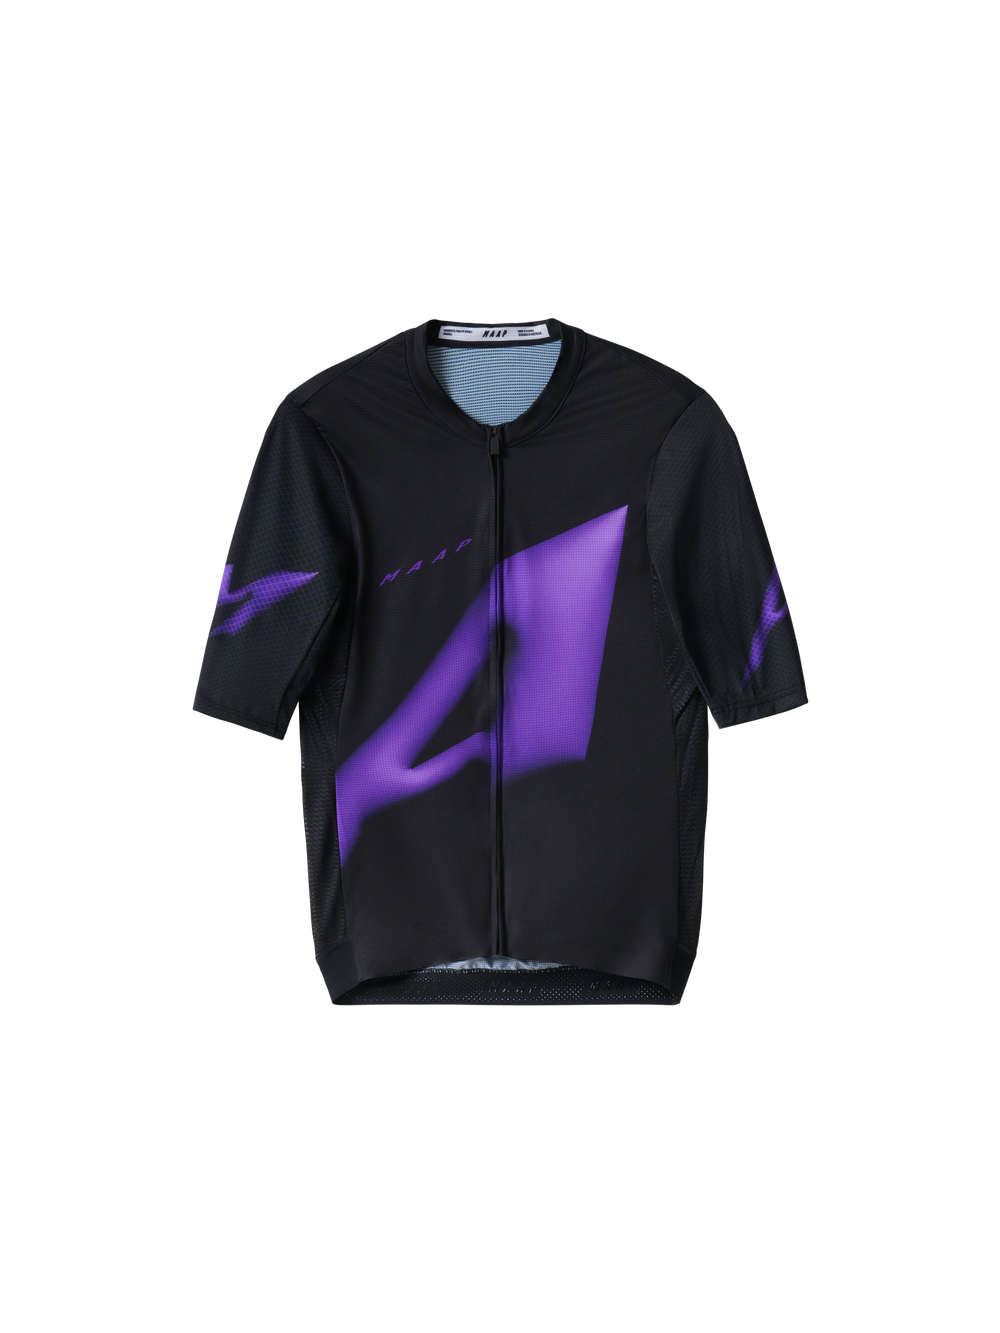 Product Image for Women's Orbit Pro Air Jersey